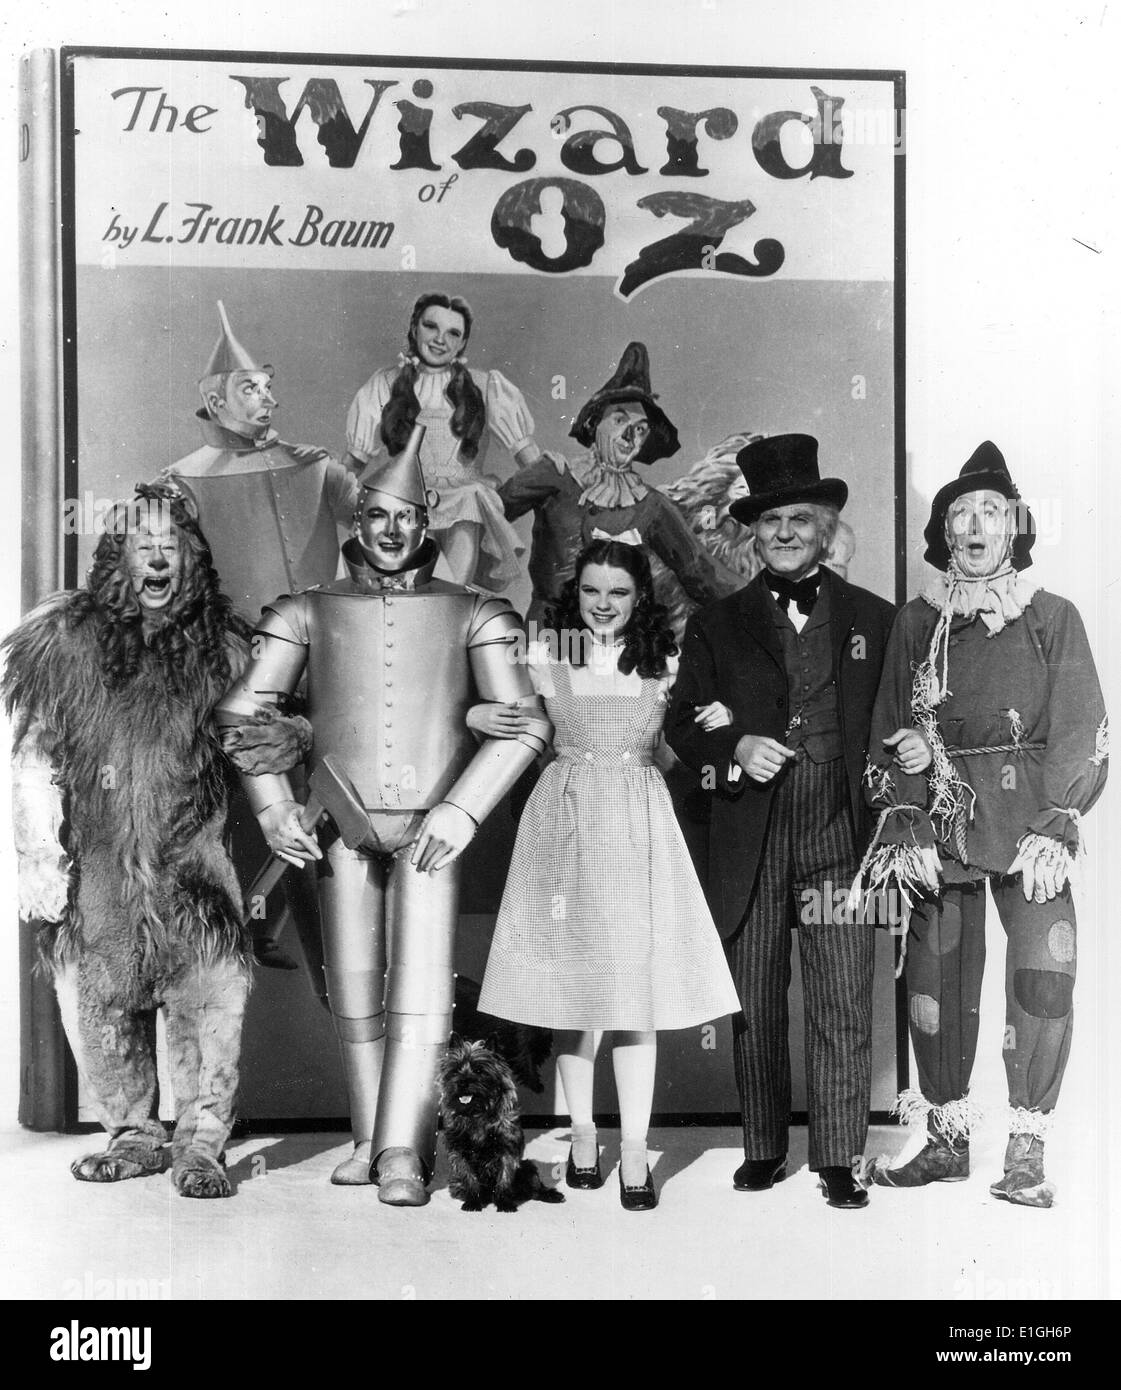 The Wizard of Oz a 1939 American musical fantasy film produced by Metro-Goldwyn-Mayer, and the most well-known and commercial adaptation based on the 1900 novel The Wonderful Wizard of Oz by L. Frank Baum. The film stars Judy Garland; Stock Photo